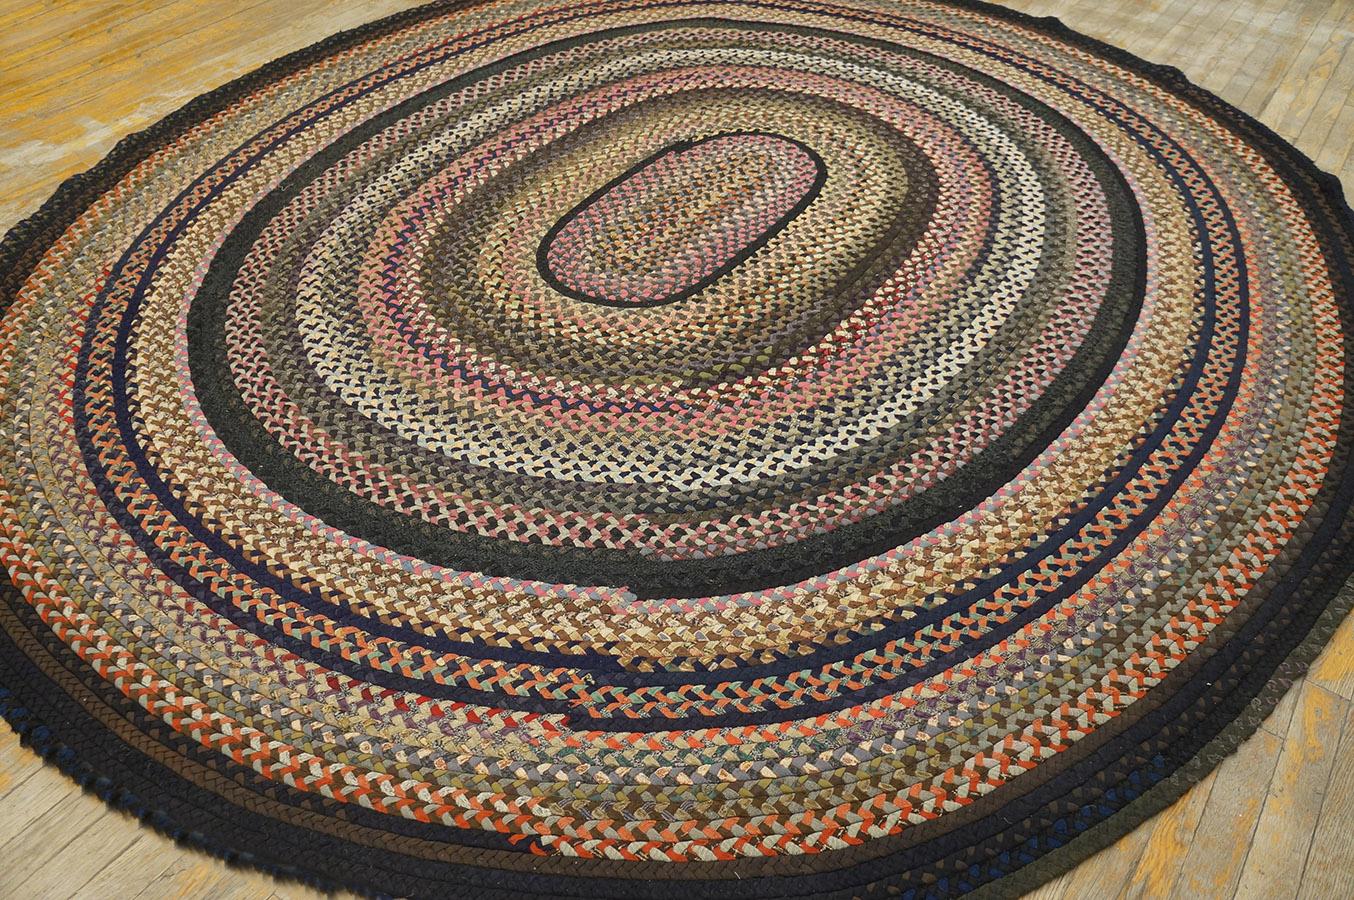 Country 1930s American Braided Rug ( 8'10 x 9'9